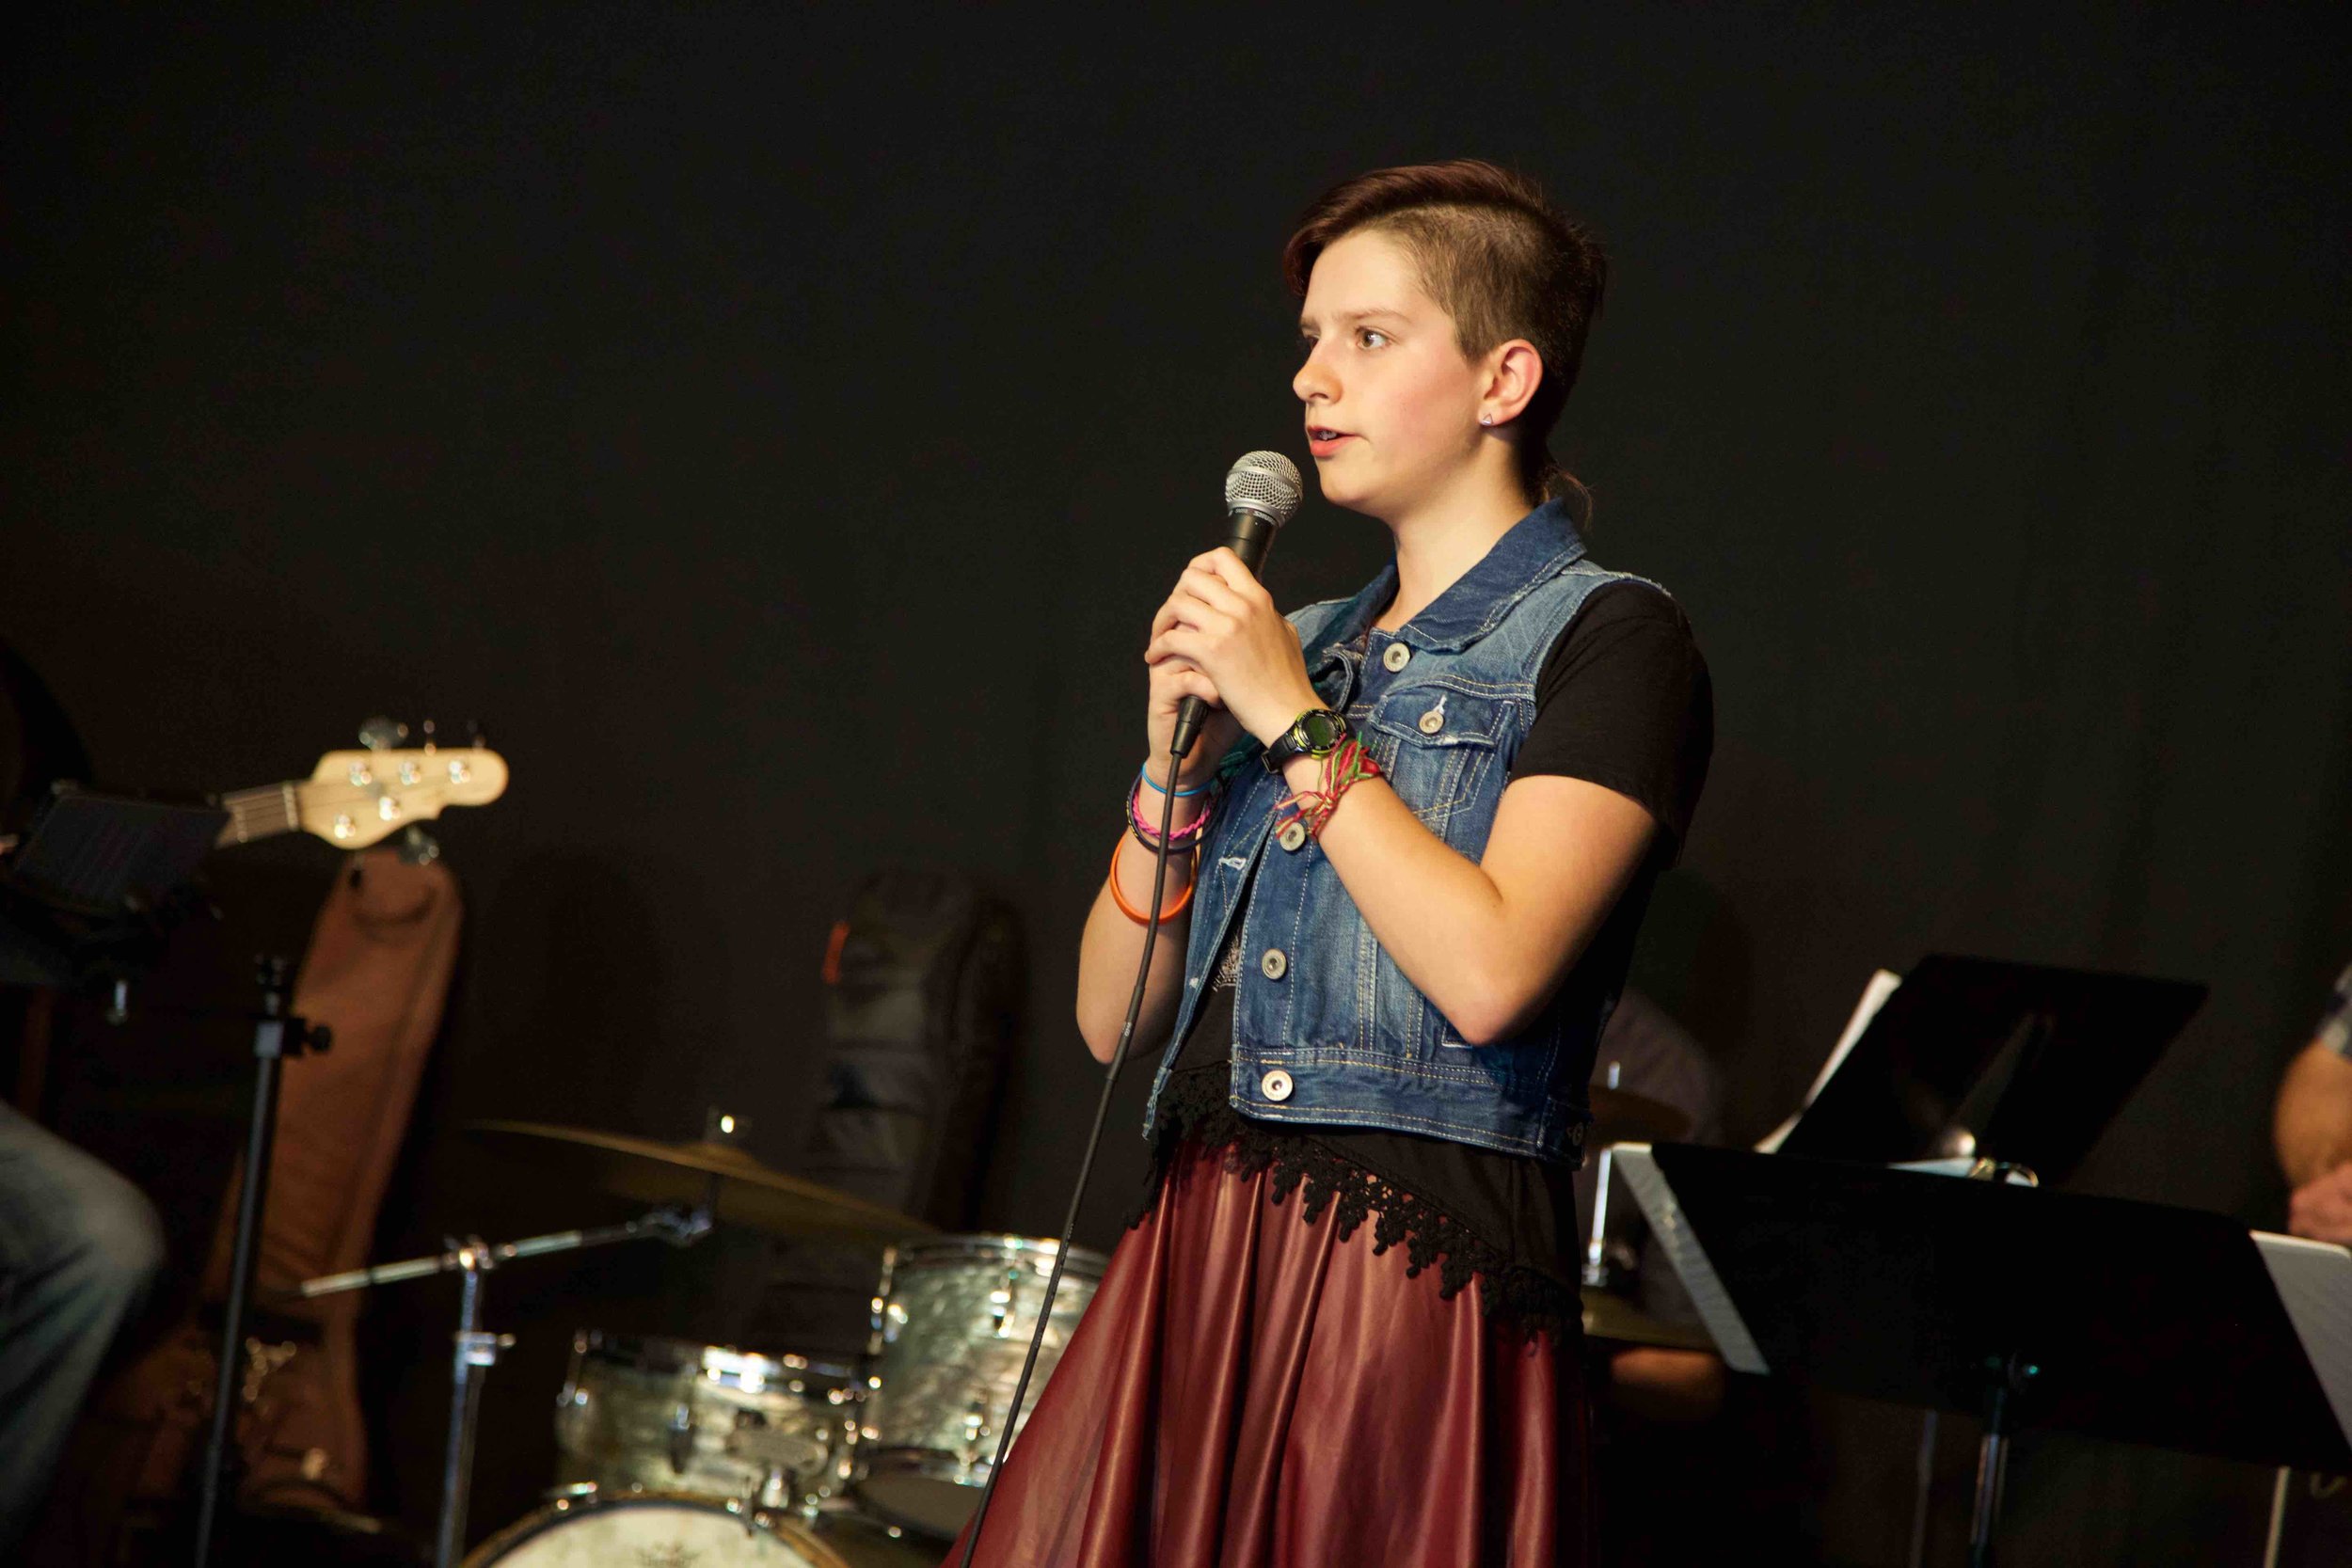 Snoqualmie singing lessons for kids, teens, and adults at Cascade Voice Academy (formerly Issaquah Voice Studio)